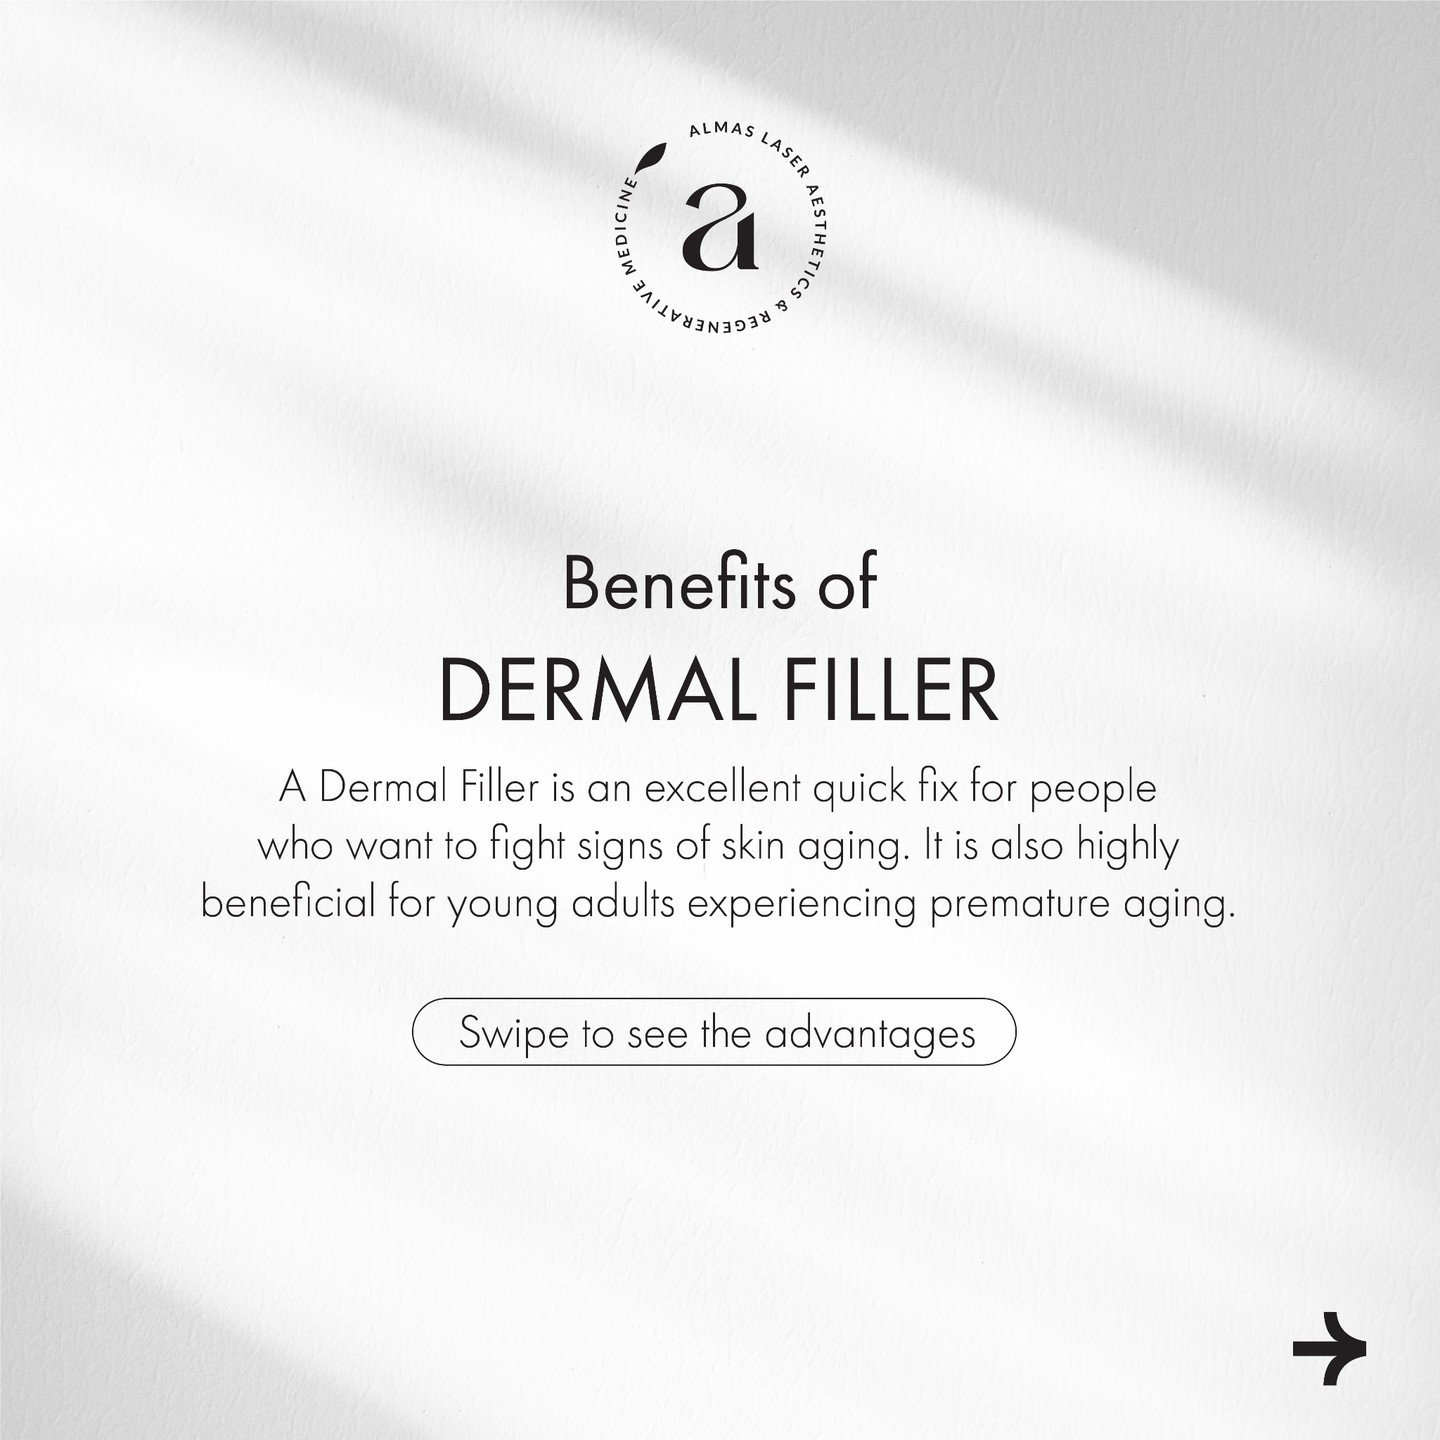 Transform your confidence and rejuvenate your skin with the magic of Dermal Fillers! Whether you're battling the signs of aging or addressing premature skin concerns, this quick fix offers a myriad of benefits. Swipe ➡️ to learn more.

📞 Call us at 